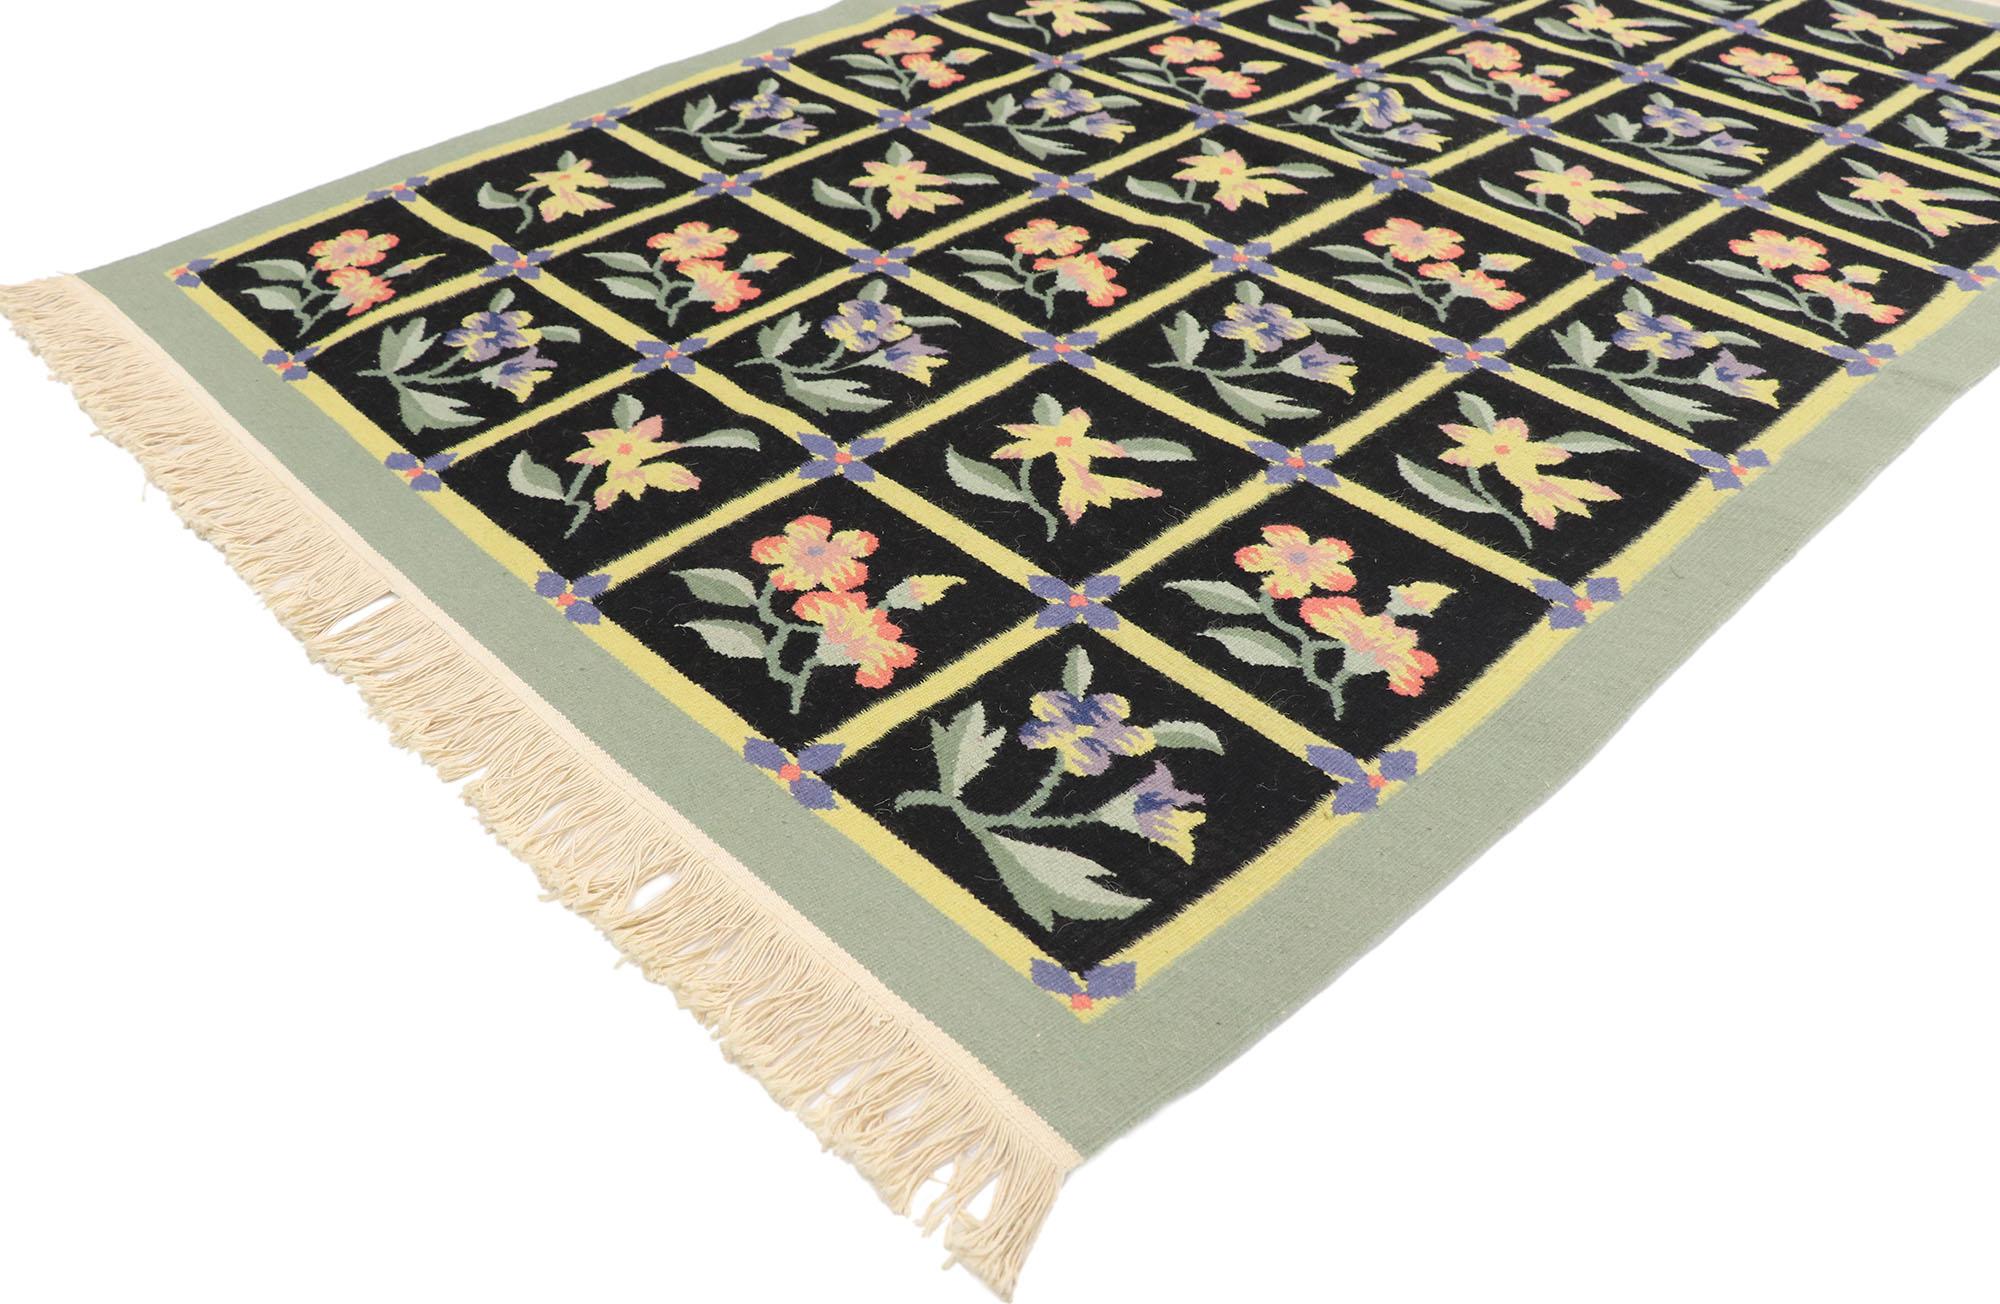 77809 vintage Chinese Floral Kilim rug with English Country cottage style 04'02 x 06'03. Cleverly composed and distinctively well-balanced, this hand-woven wool vintage Chinse floral kilim rug will take on a curated lived-in look that feels timeless